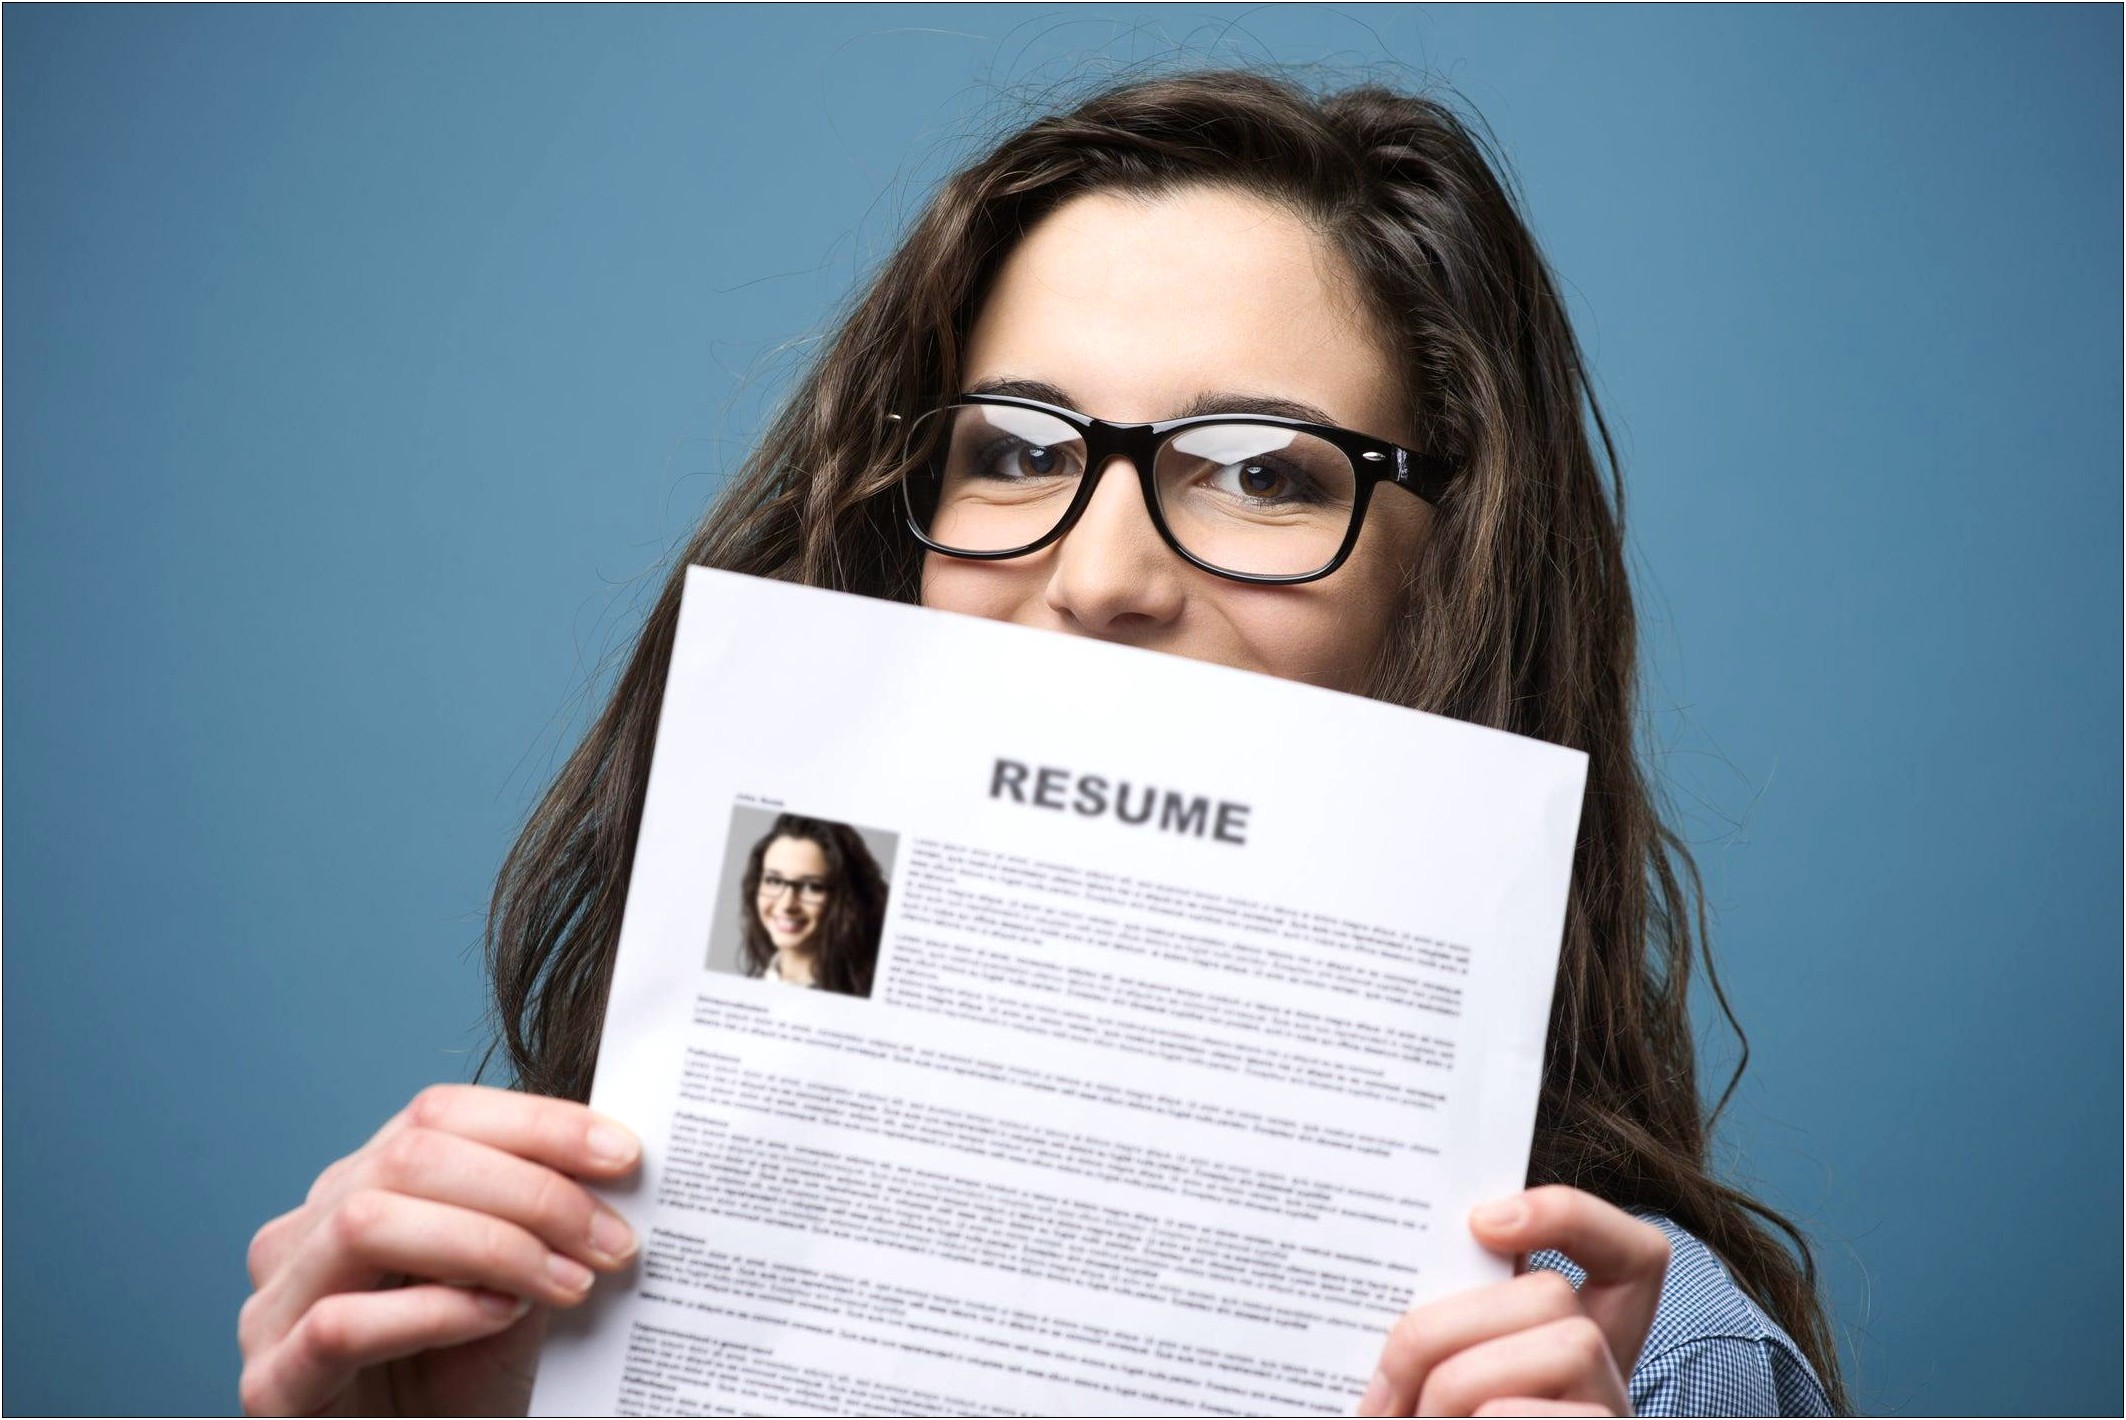 Lose Your Resume Land The Job